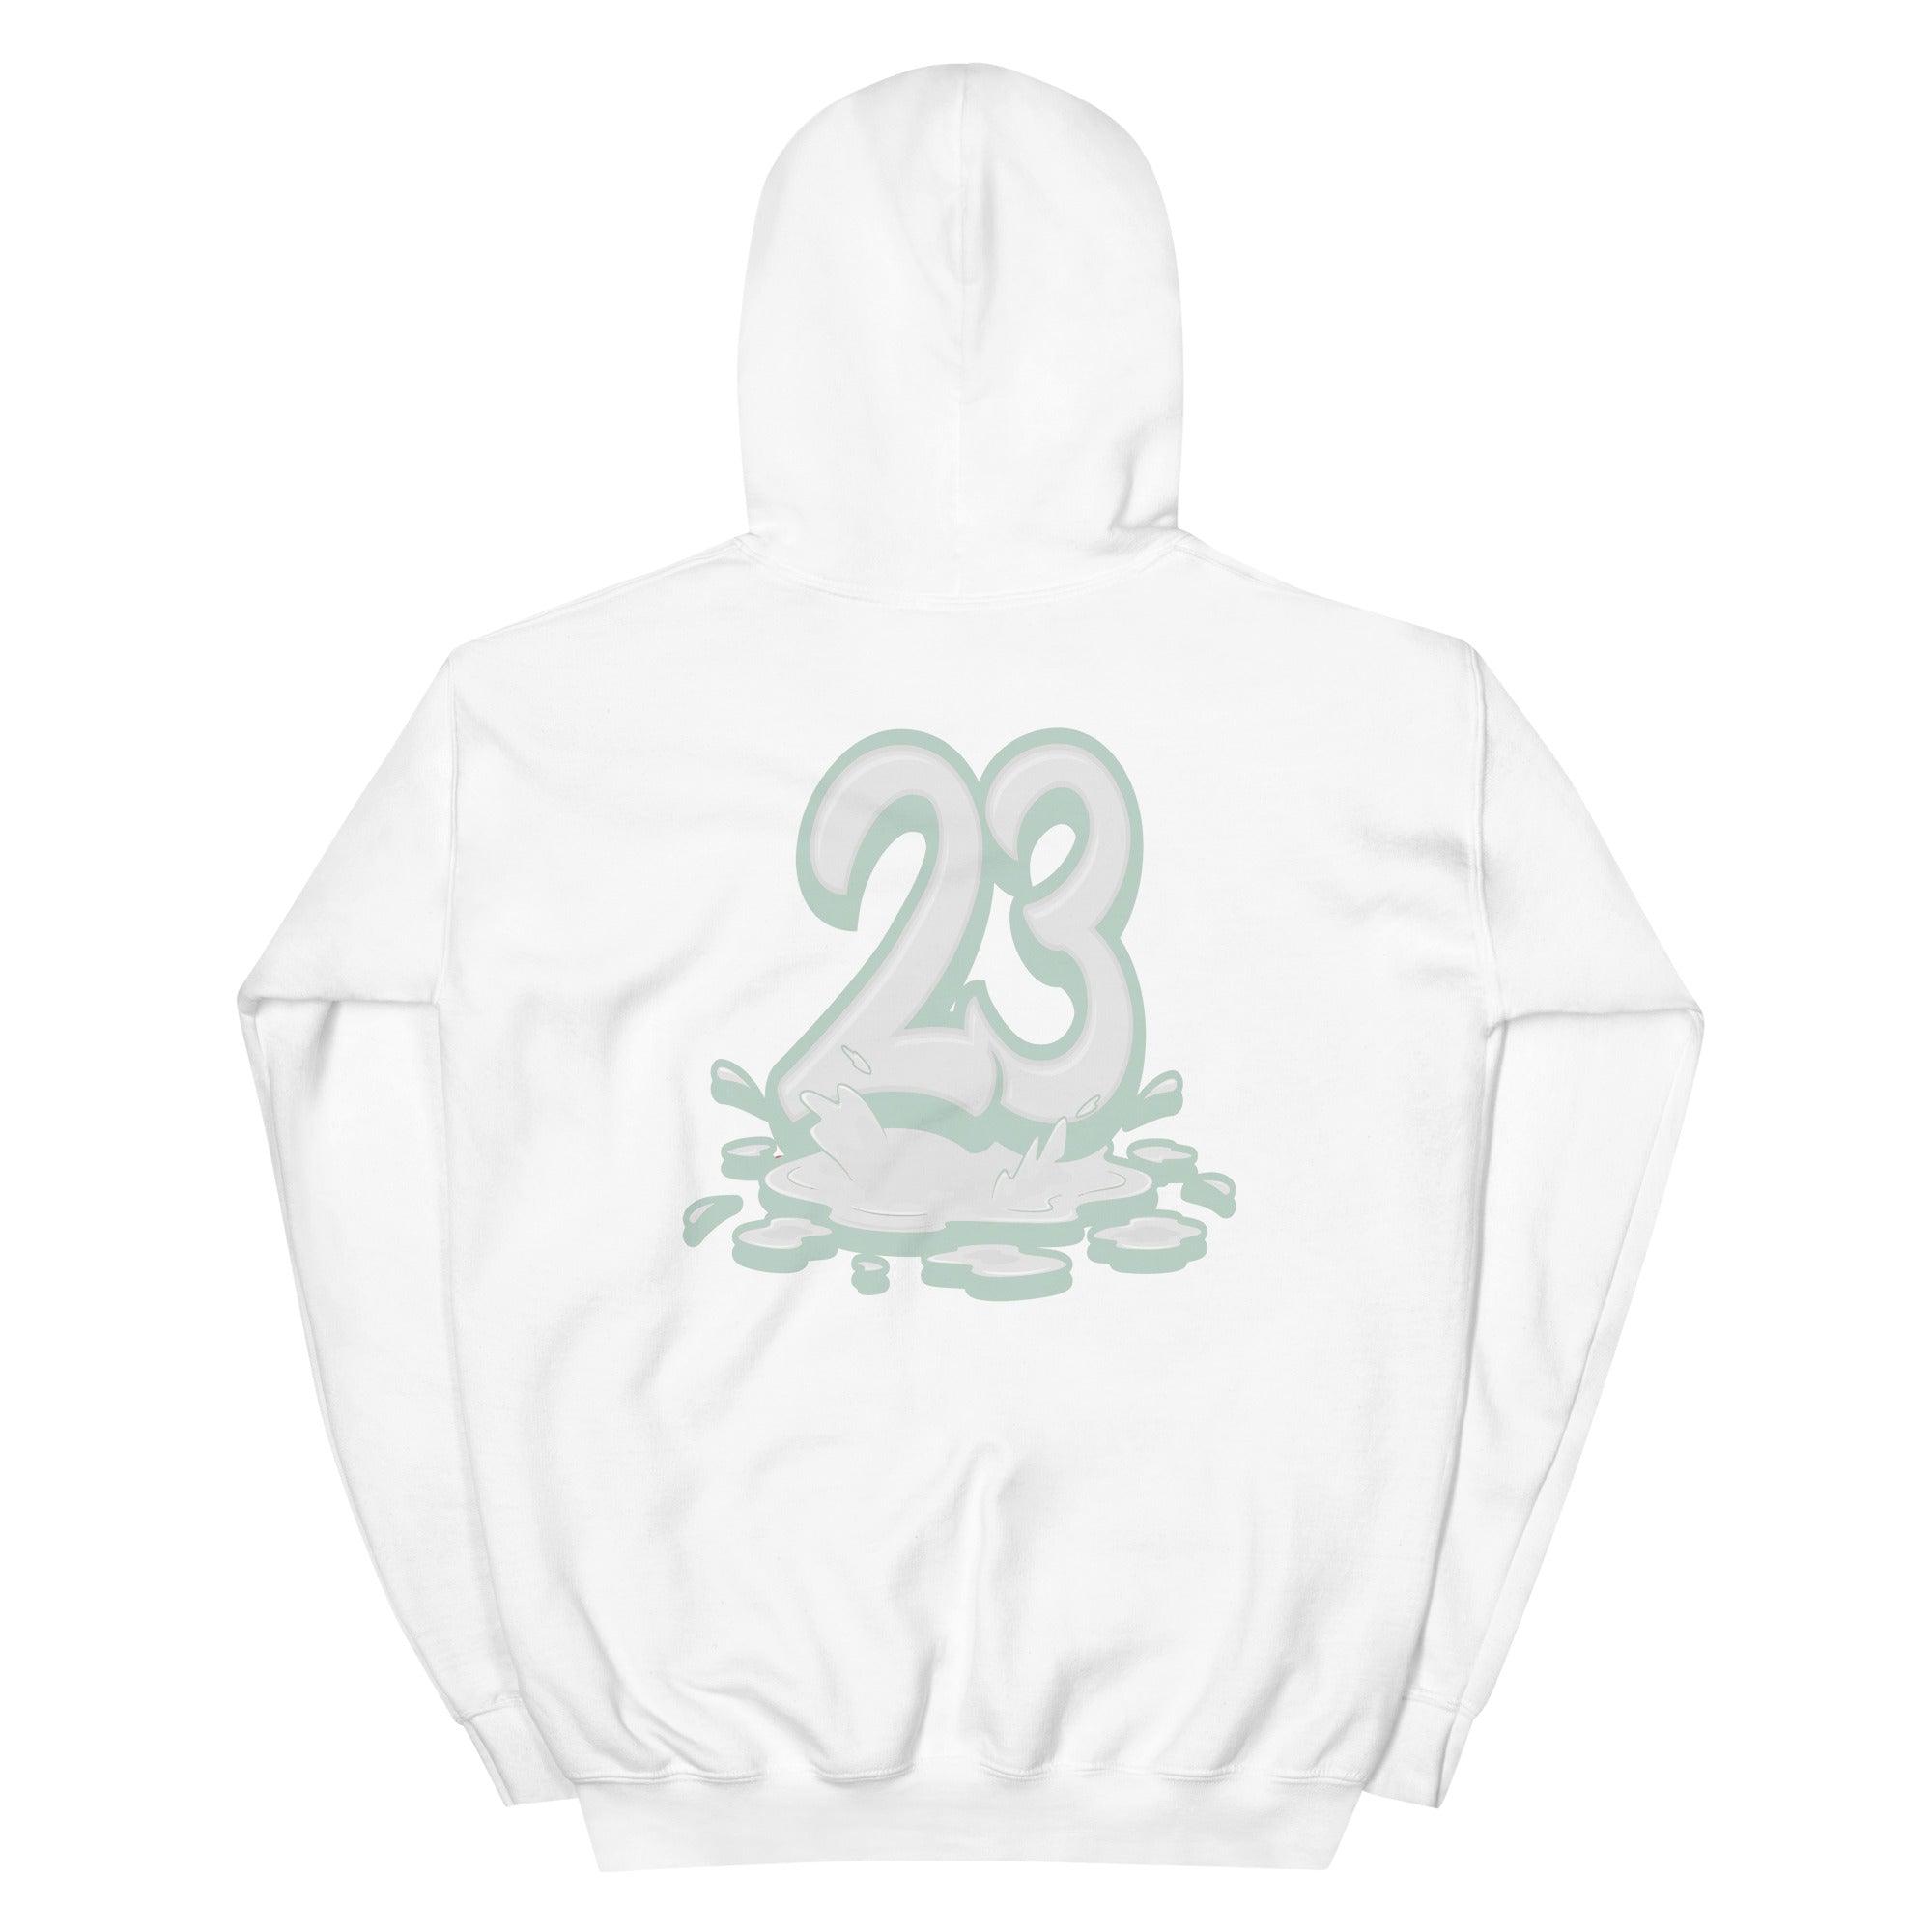 Number 23 Melting Hoodie Nike Dunk Low Next Nature White Mint photo